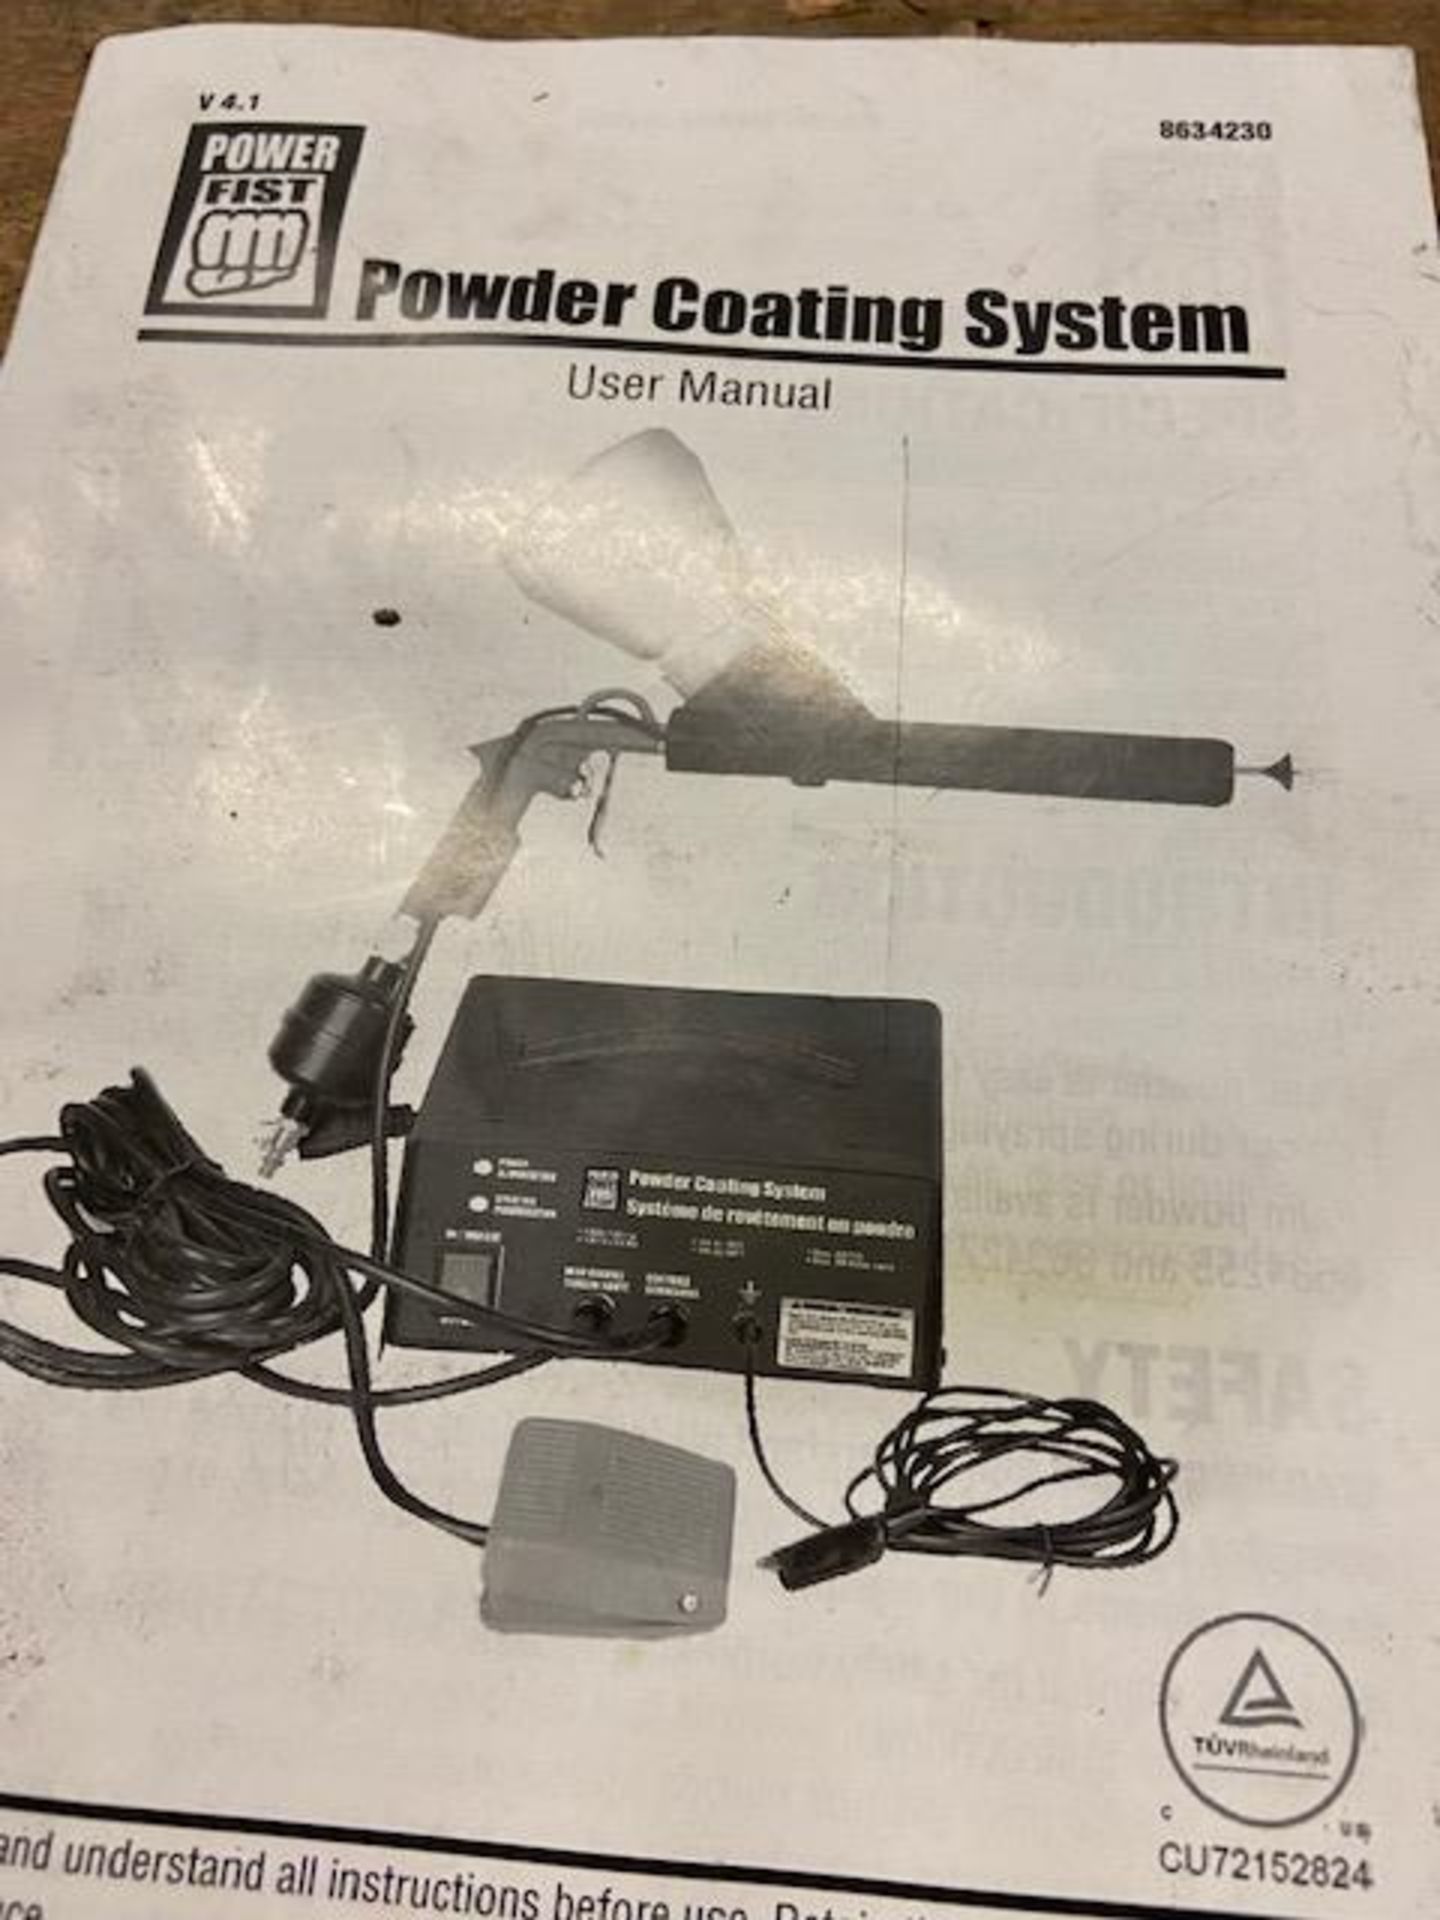 Power Fist Powder Coating System - Image 2 of 3